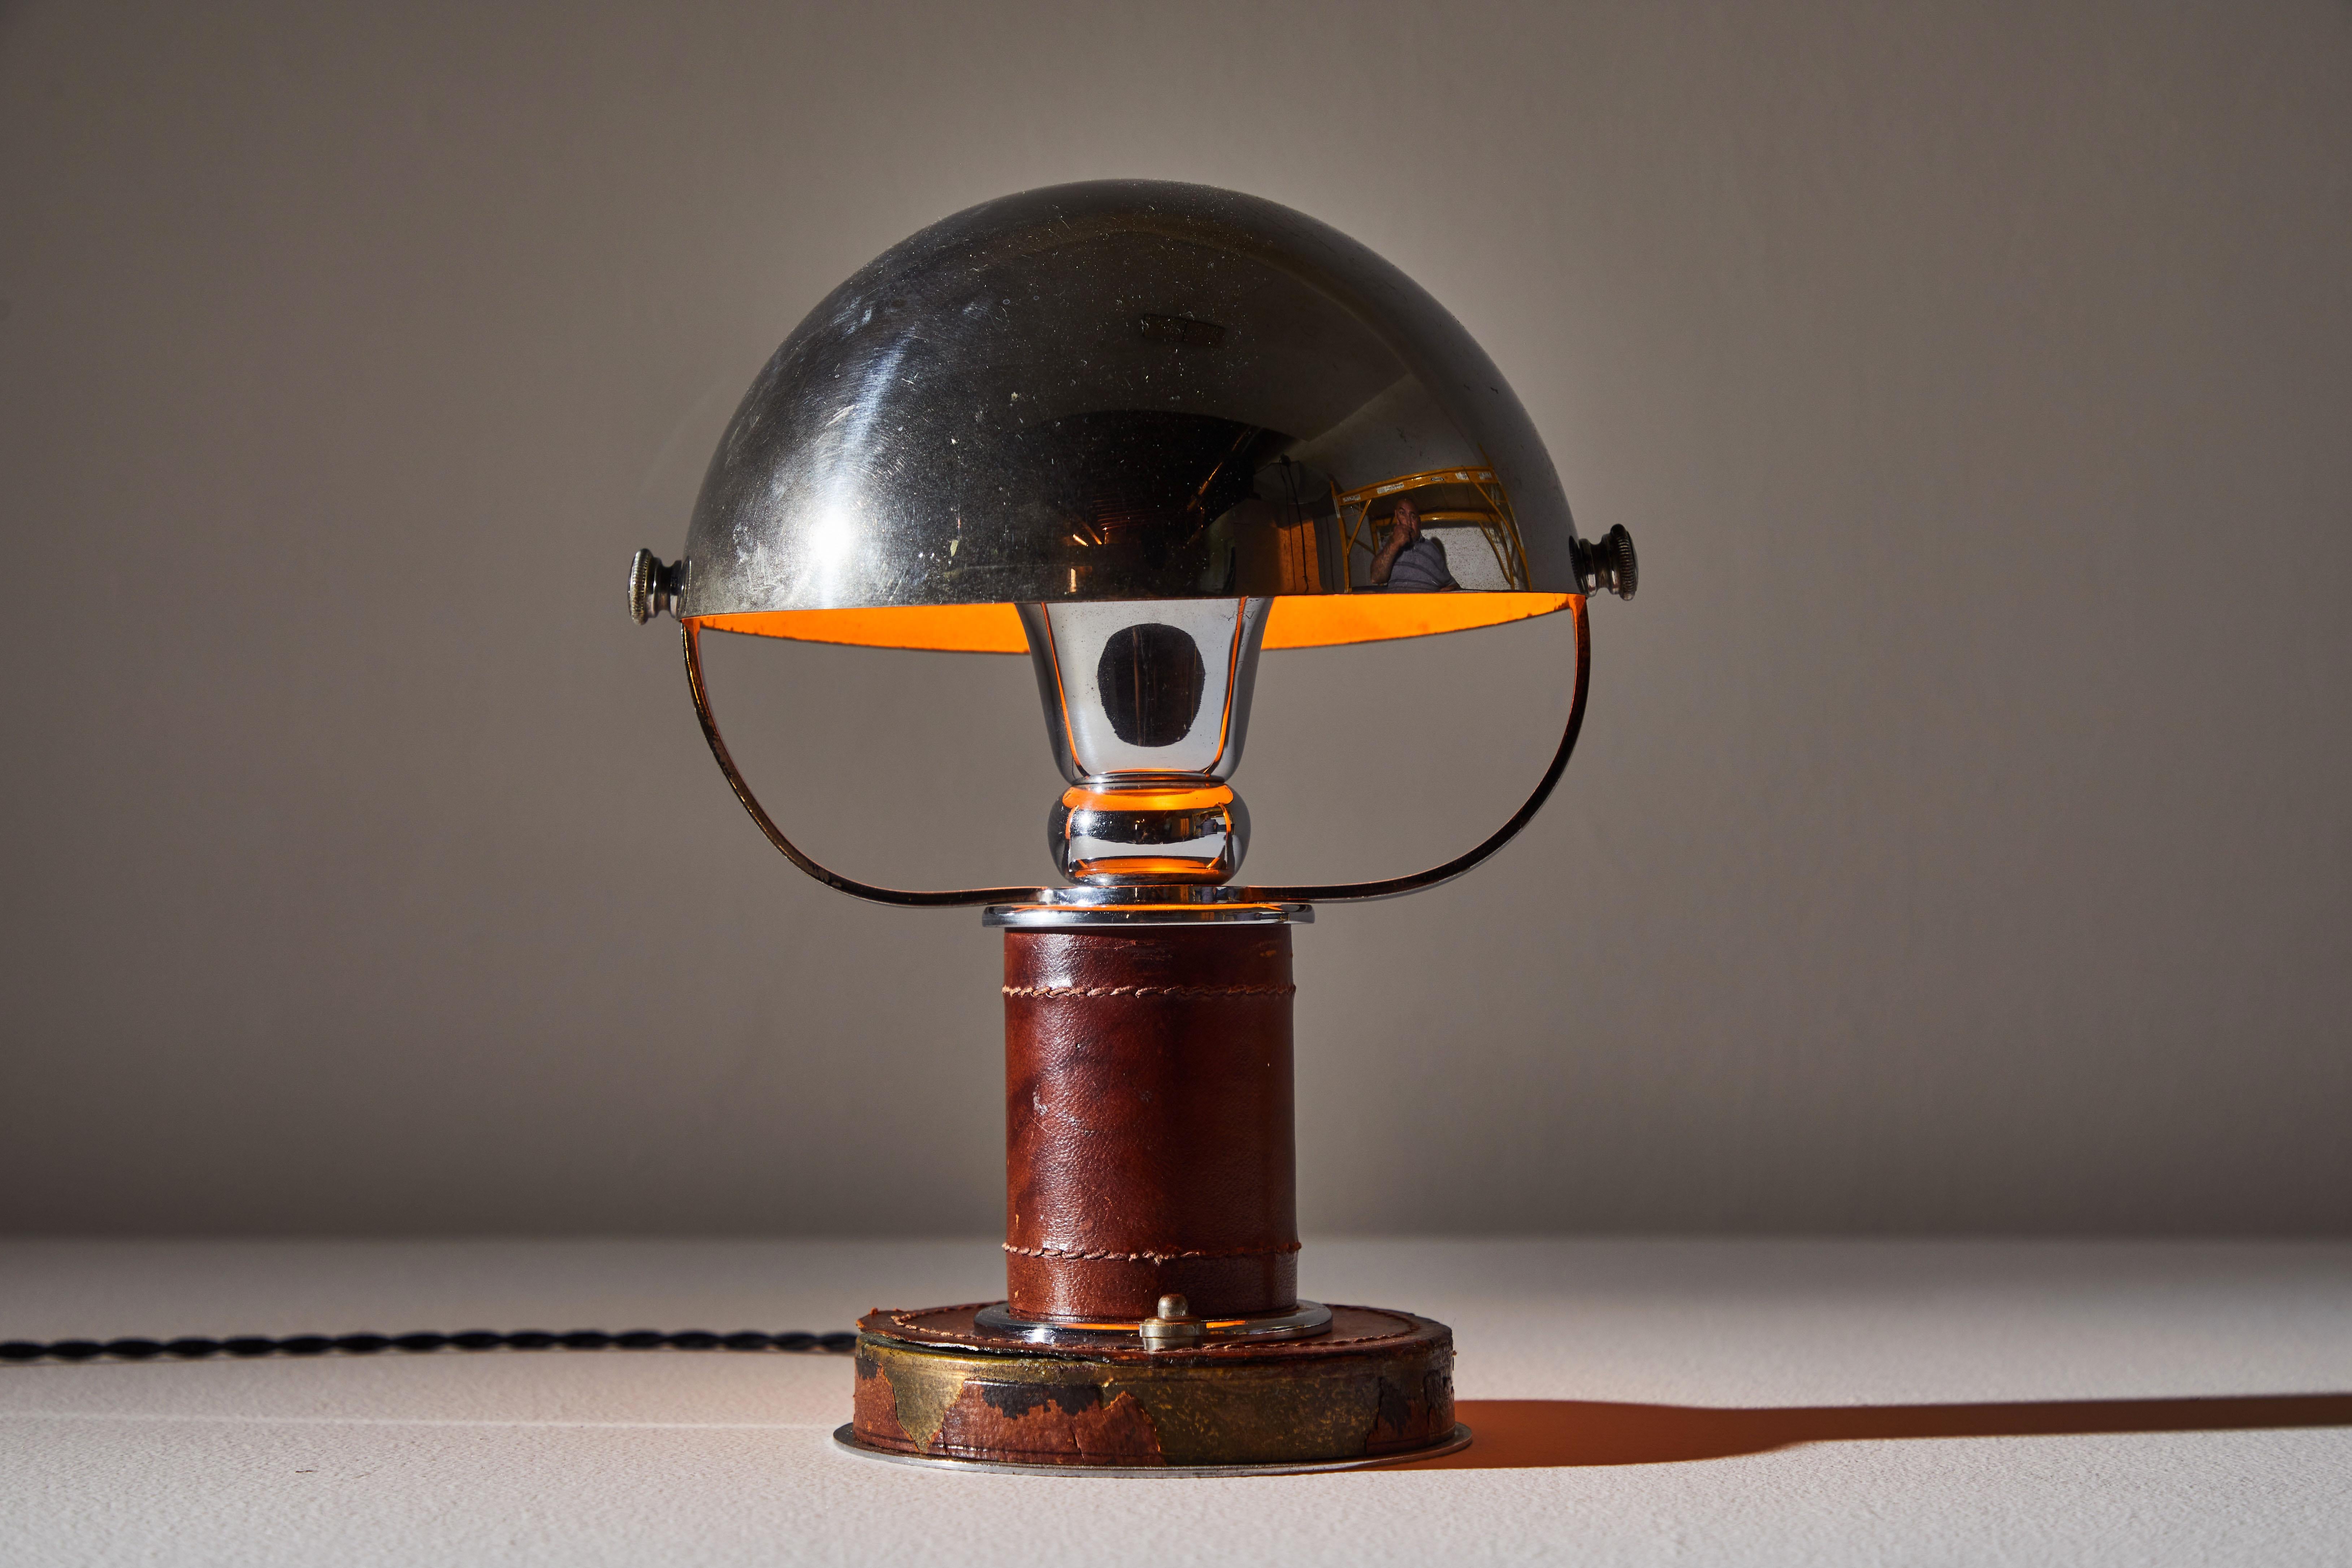 Table lamp by Paul Dupre for Hermès. Designed and manufactured in France, circa 1920s- early 1930s. Art Deco leather and chrome table lamp. Rewired with black french twist cord for U.S. standards. The rotating hemispherical shade is supported by two